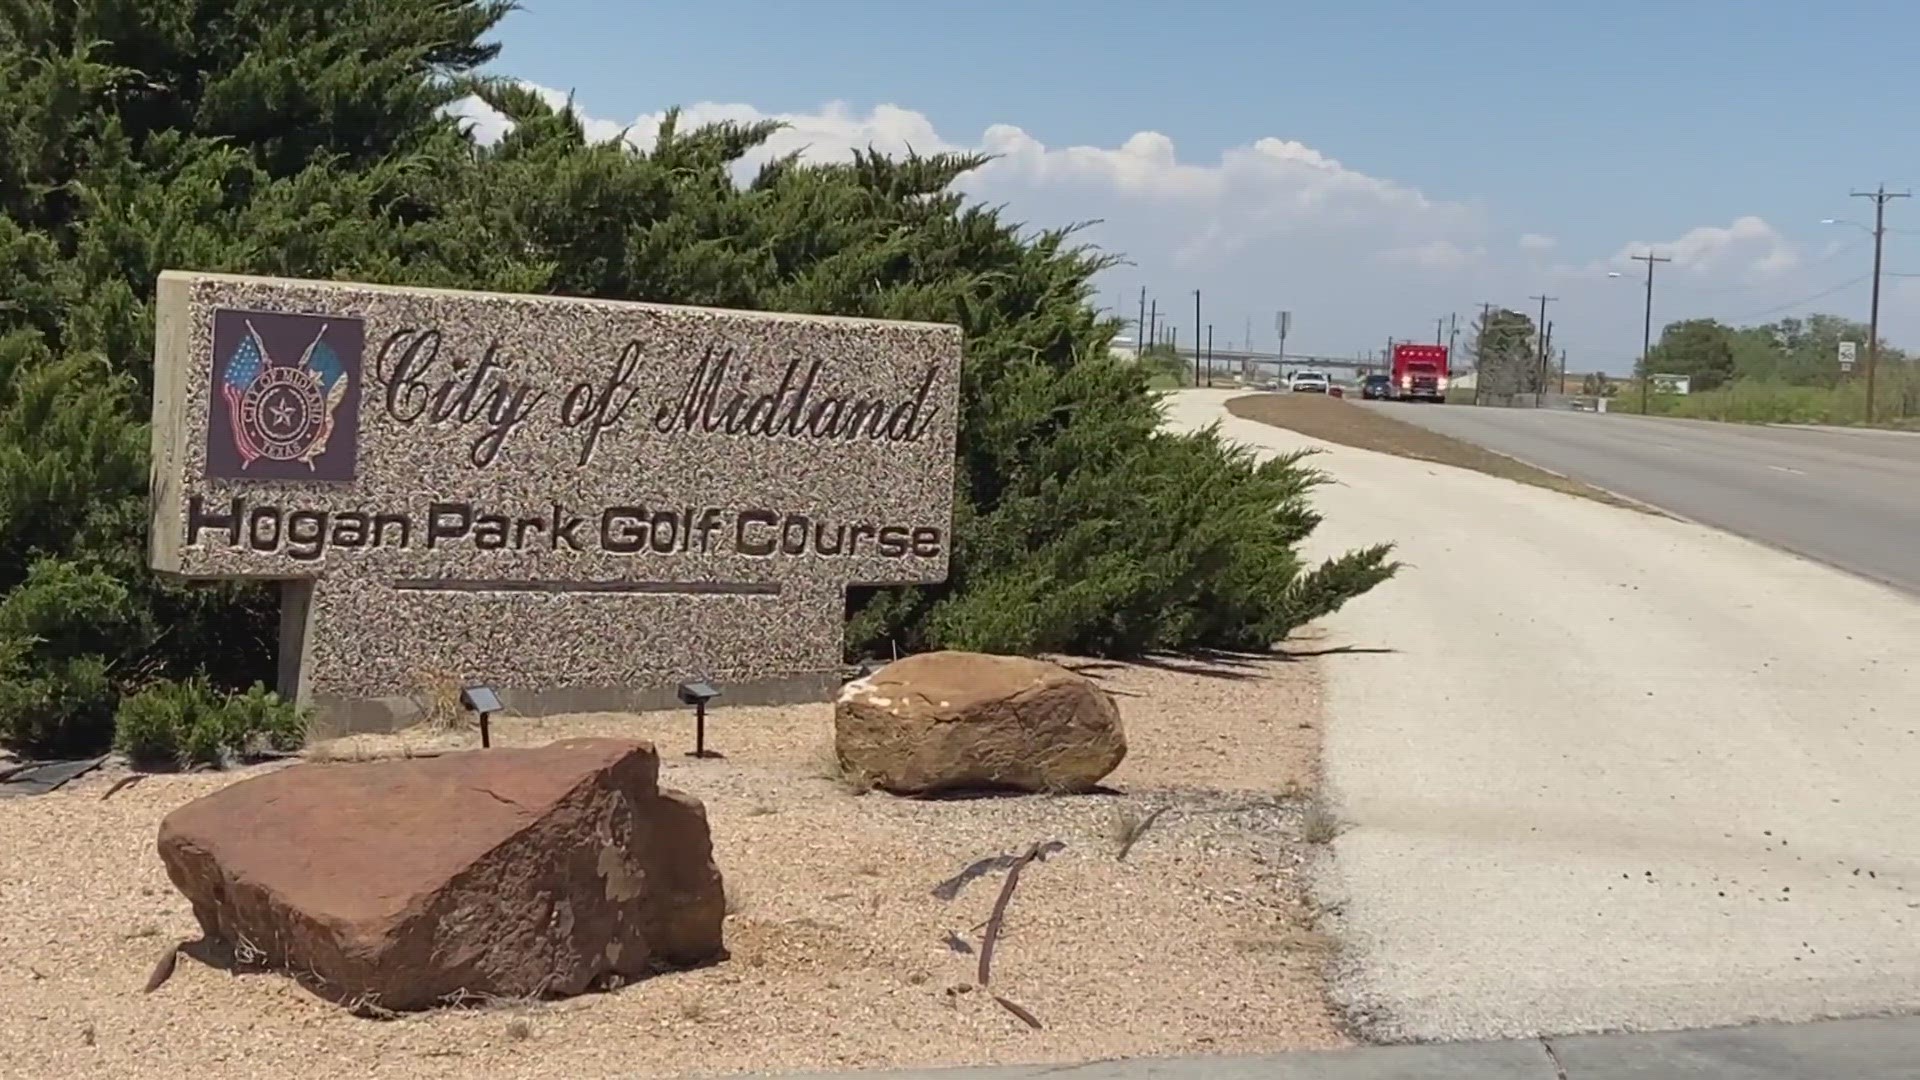 On April 23, Midland City Council did not take action on changing the golf course's rate structure. However, it is still on the table.